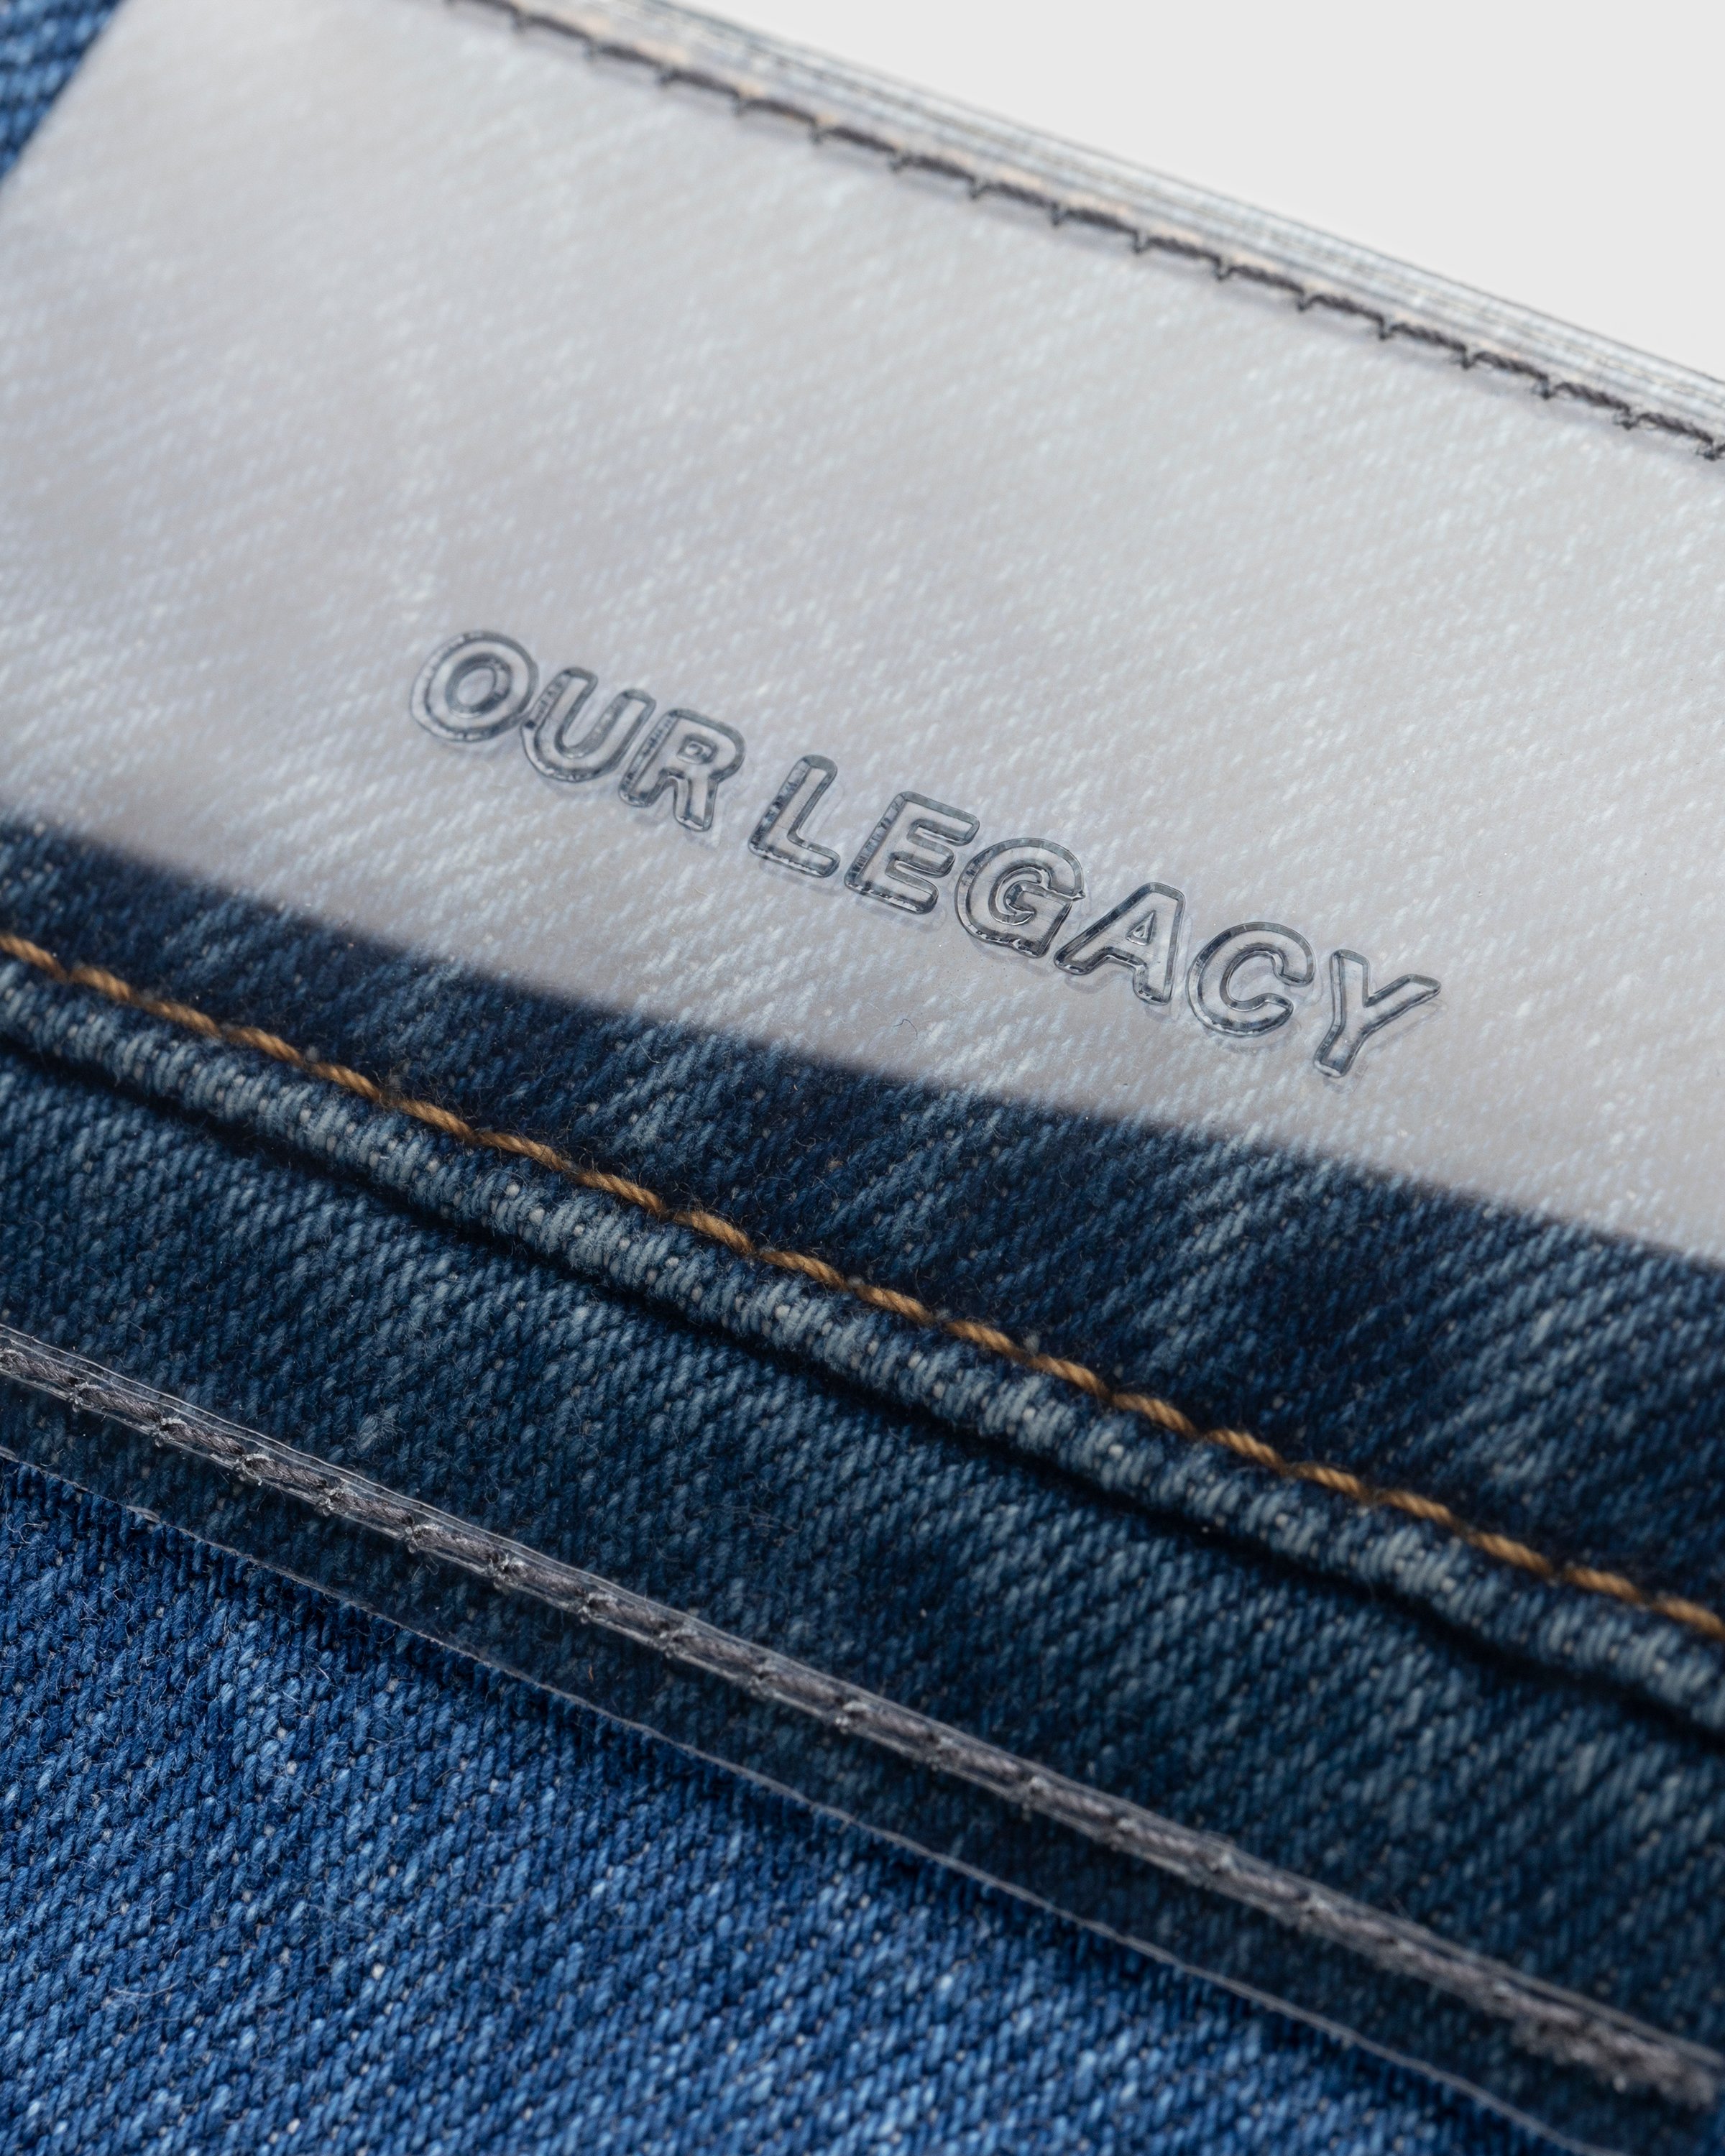 Our Legacy - Extended Third Cut Glass Bleach Denim - Clothing - Blue - Image 7